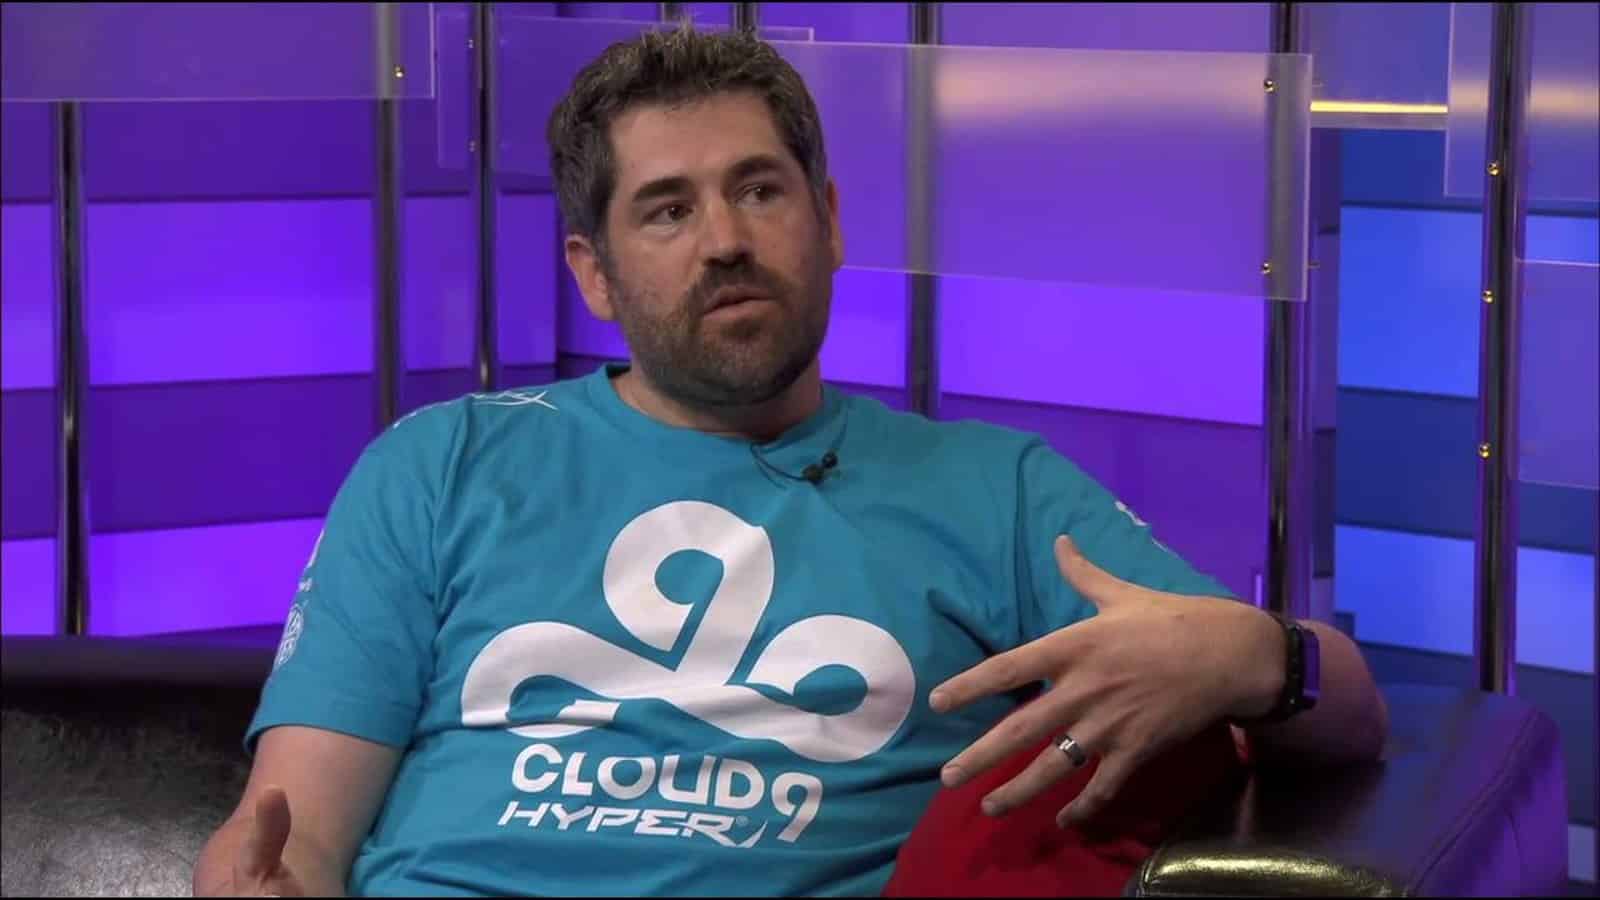 Image of Cloud9 founder and CEO Jack Etienne